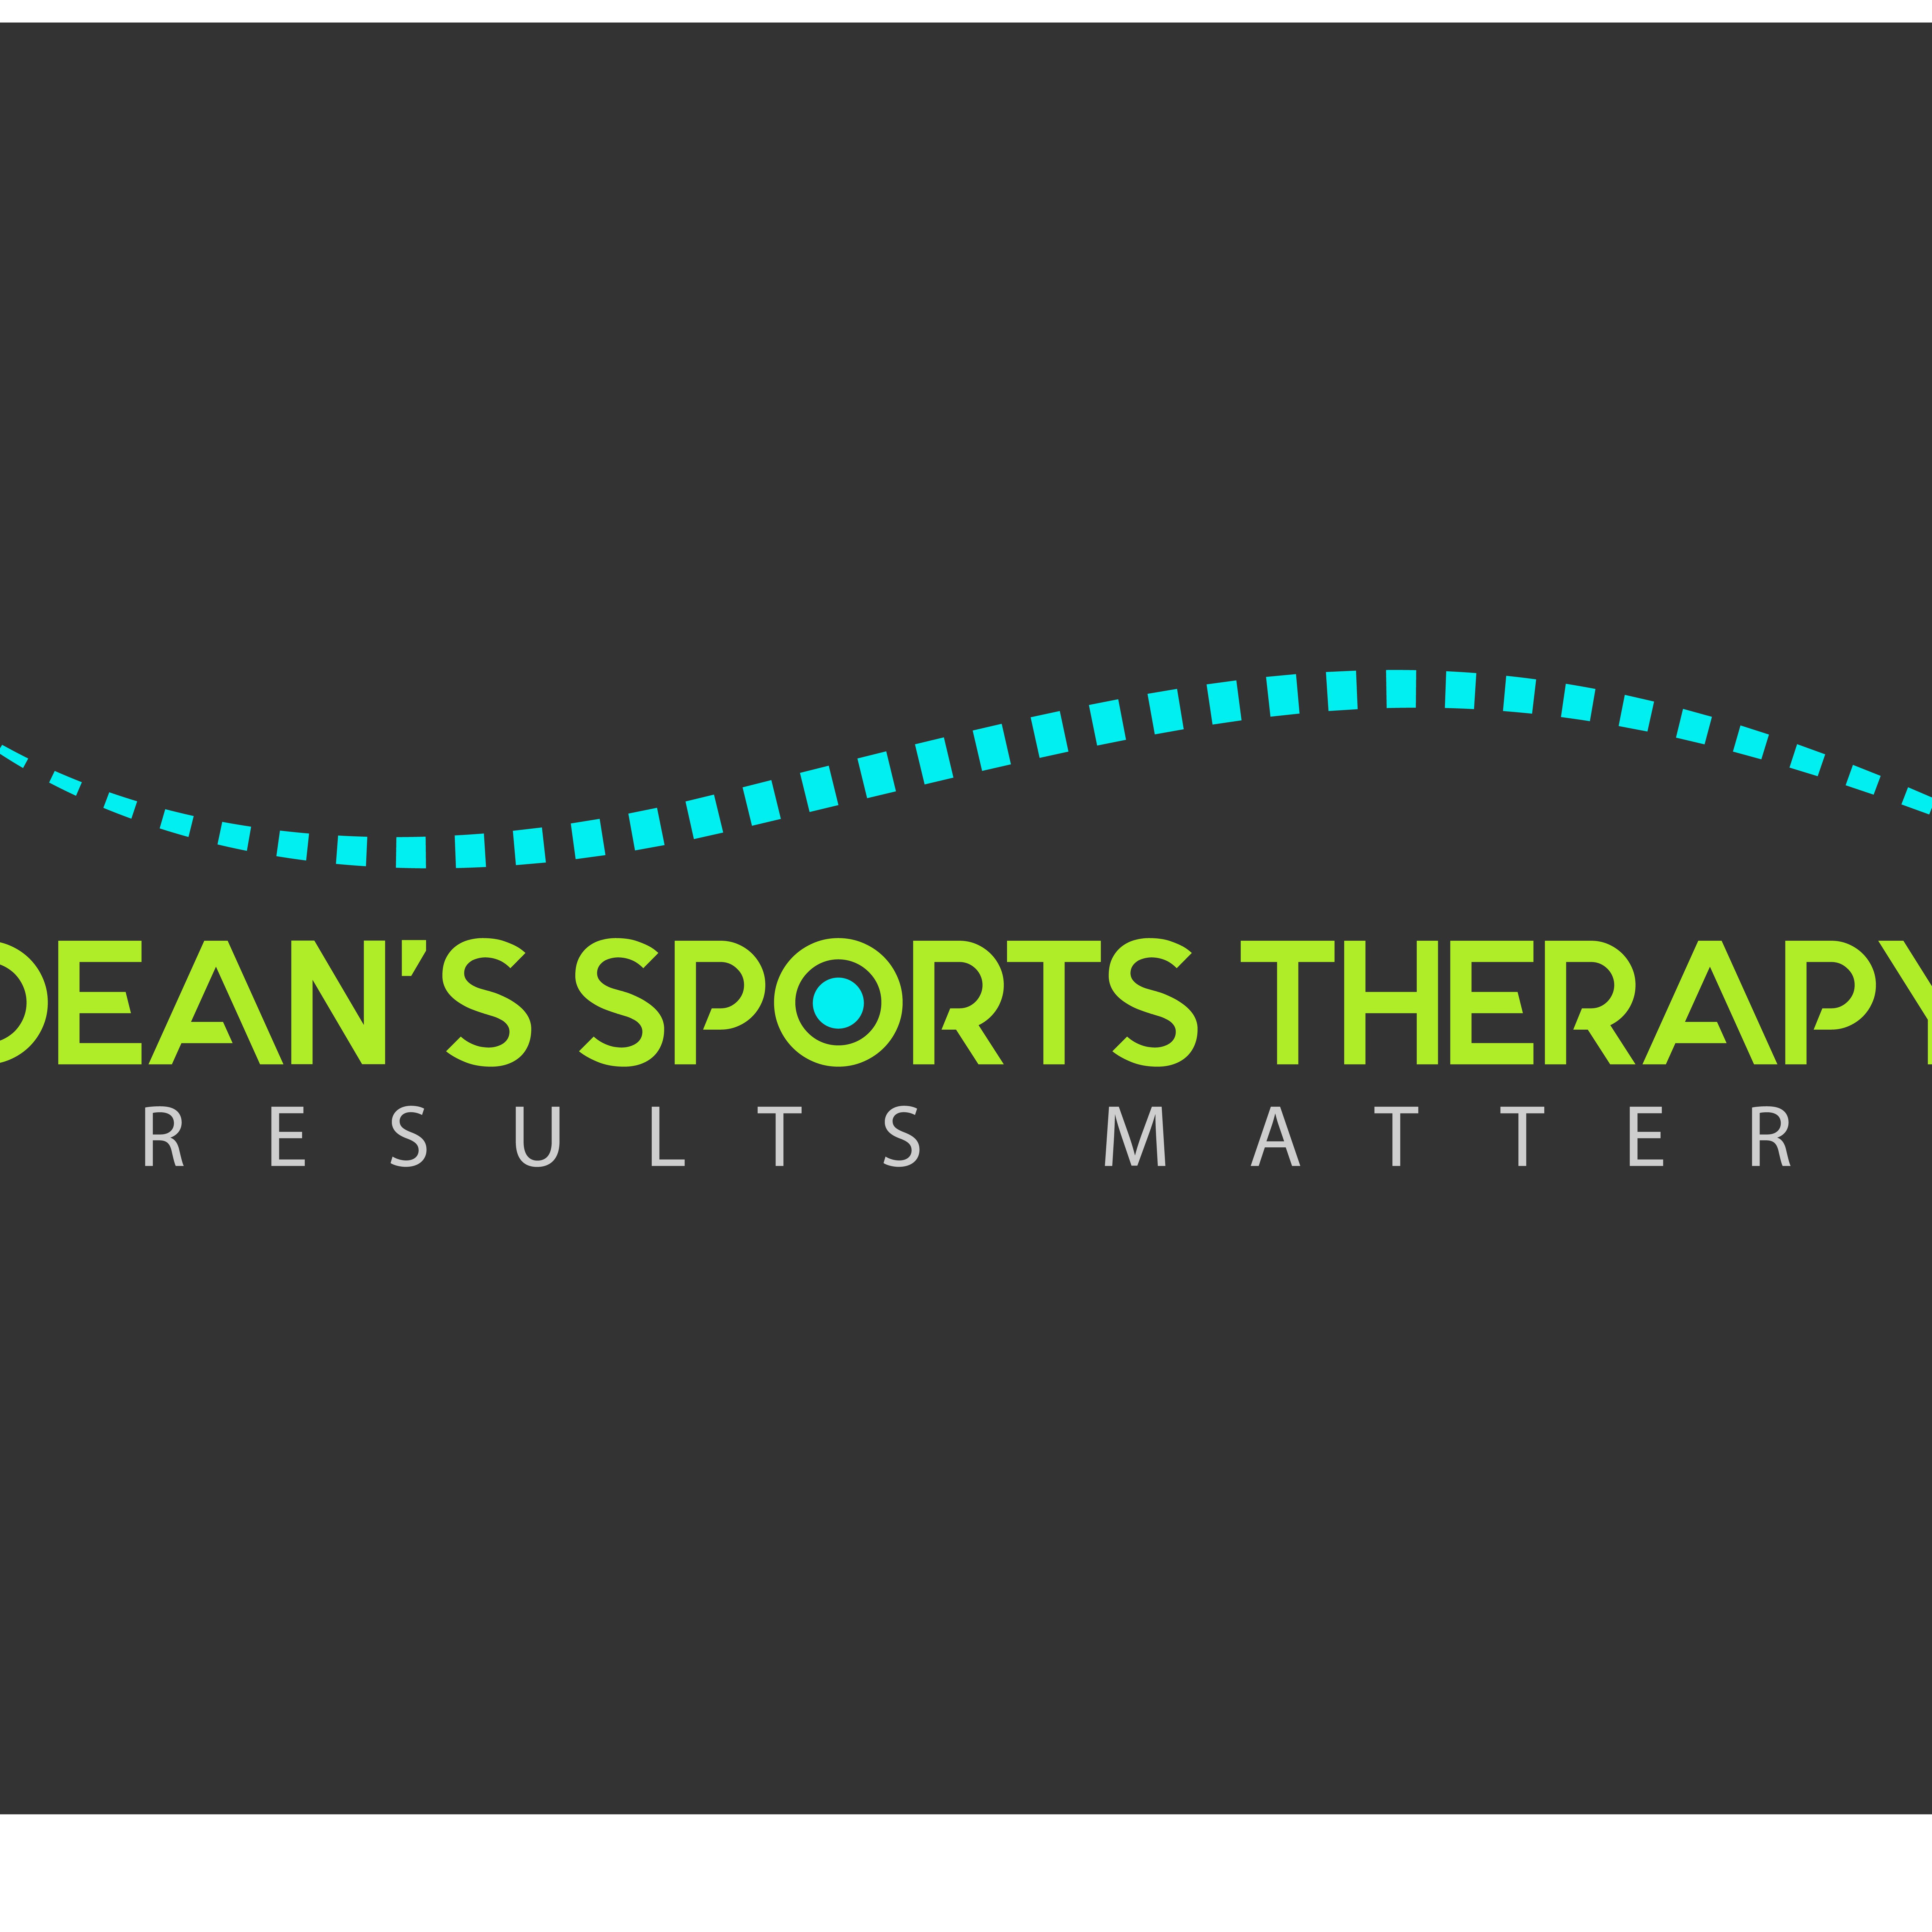 Dean's Sports Therapy Logo